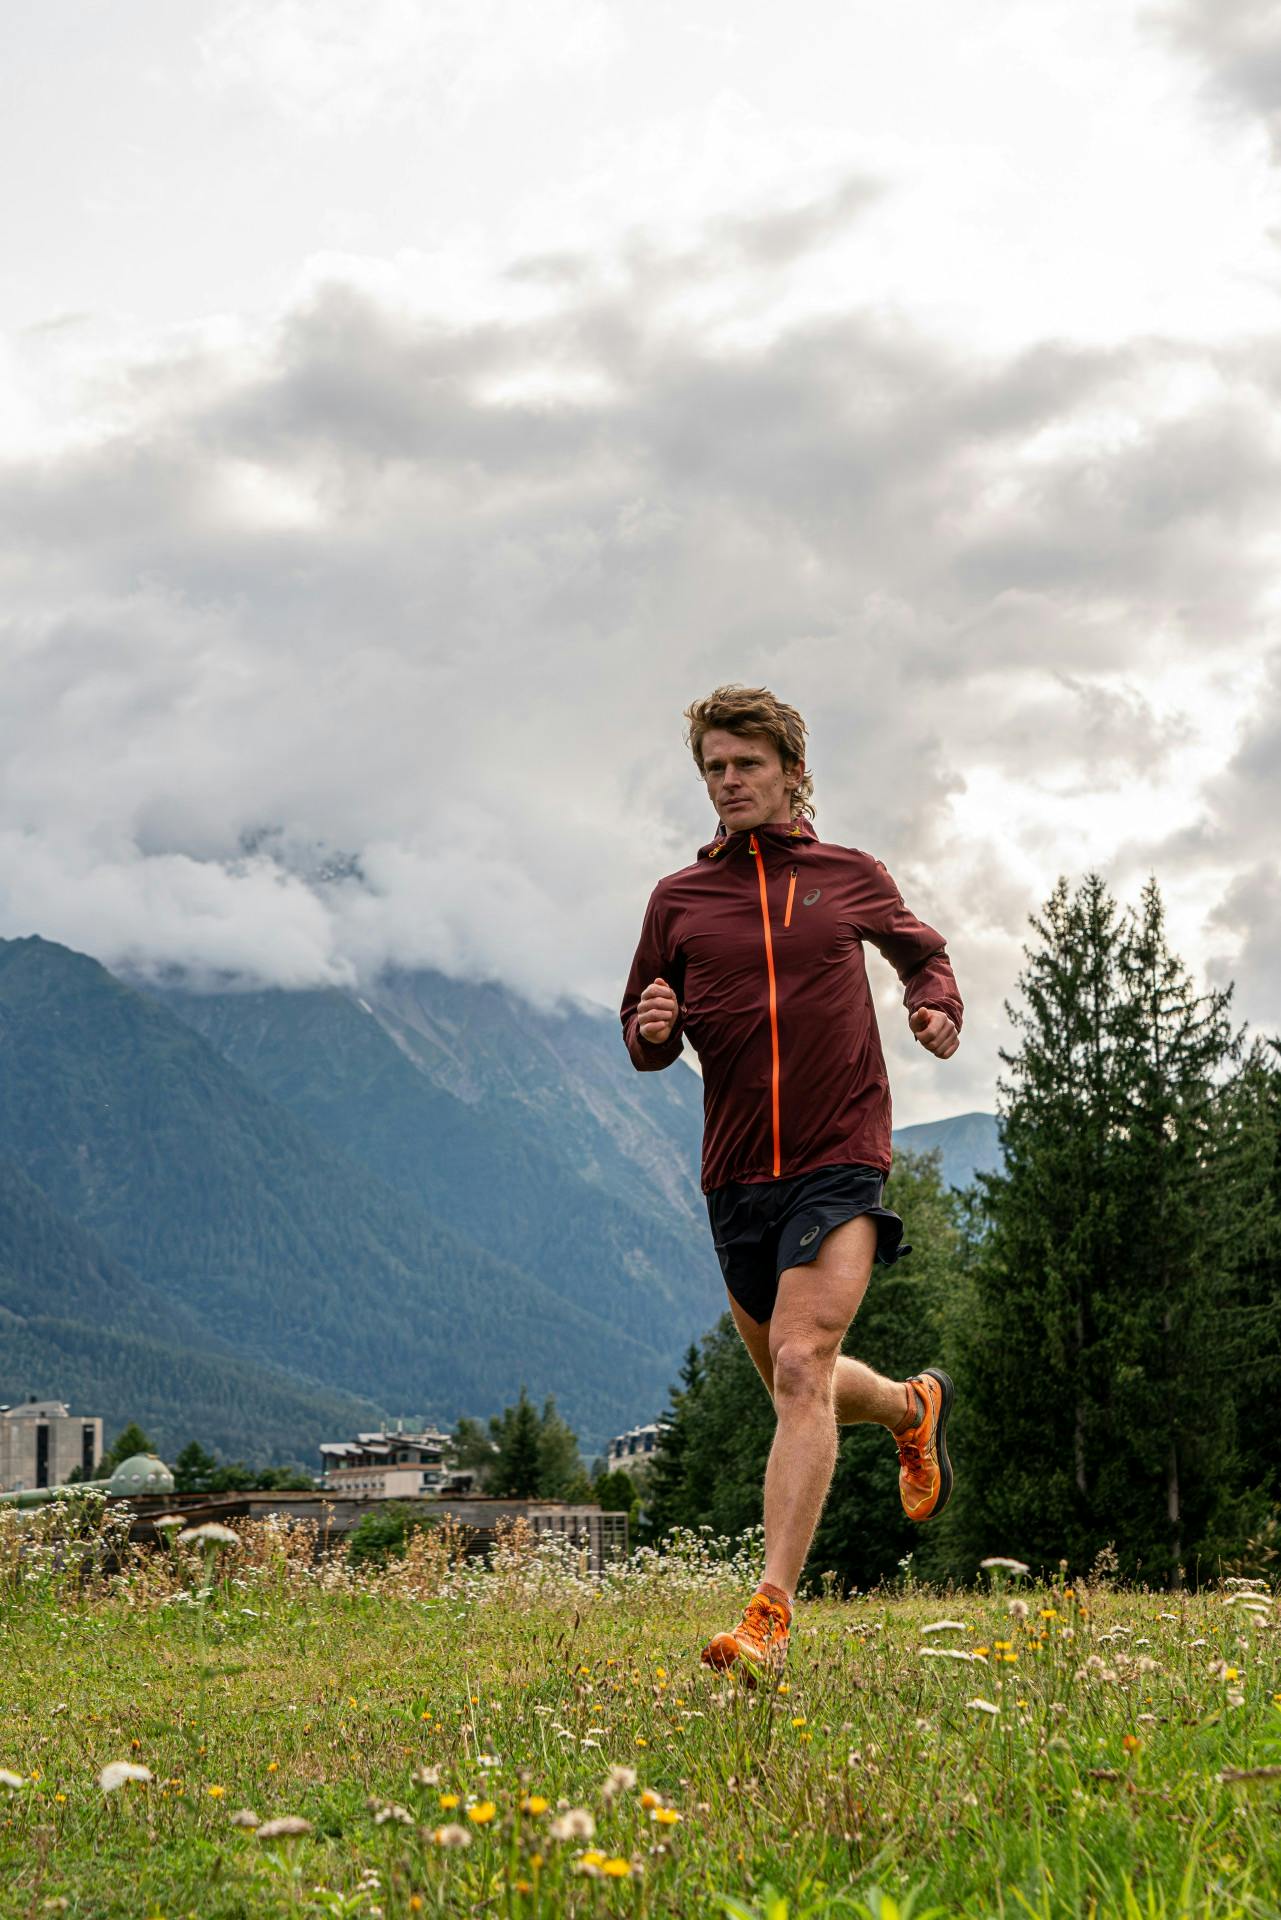 ASICS spotlights calming power of trail running with new FUJI SPEED 2 shoe  